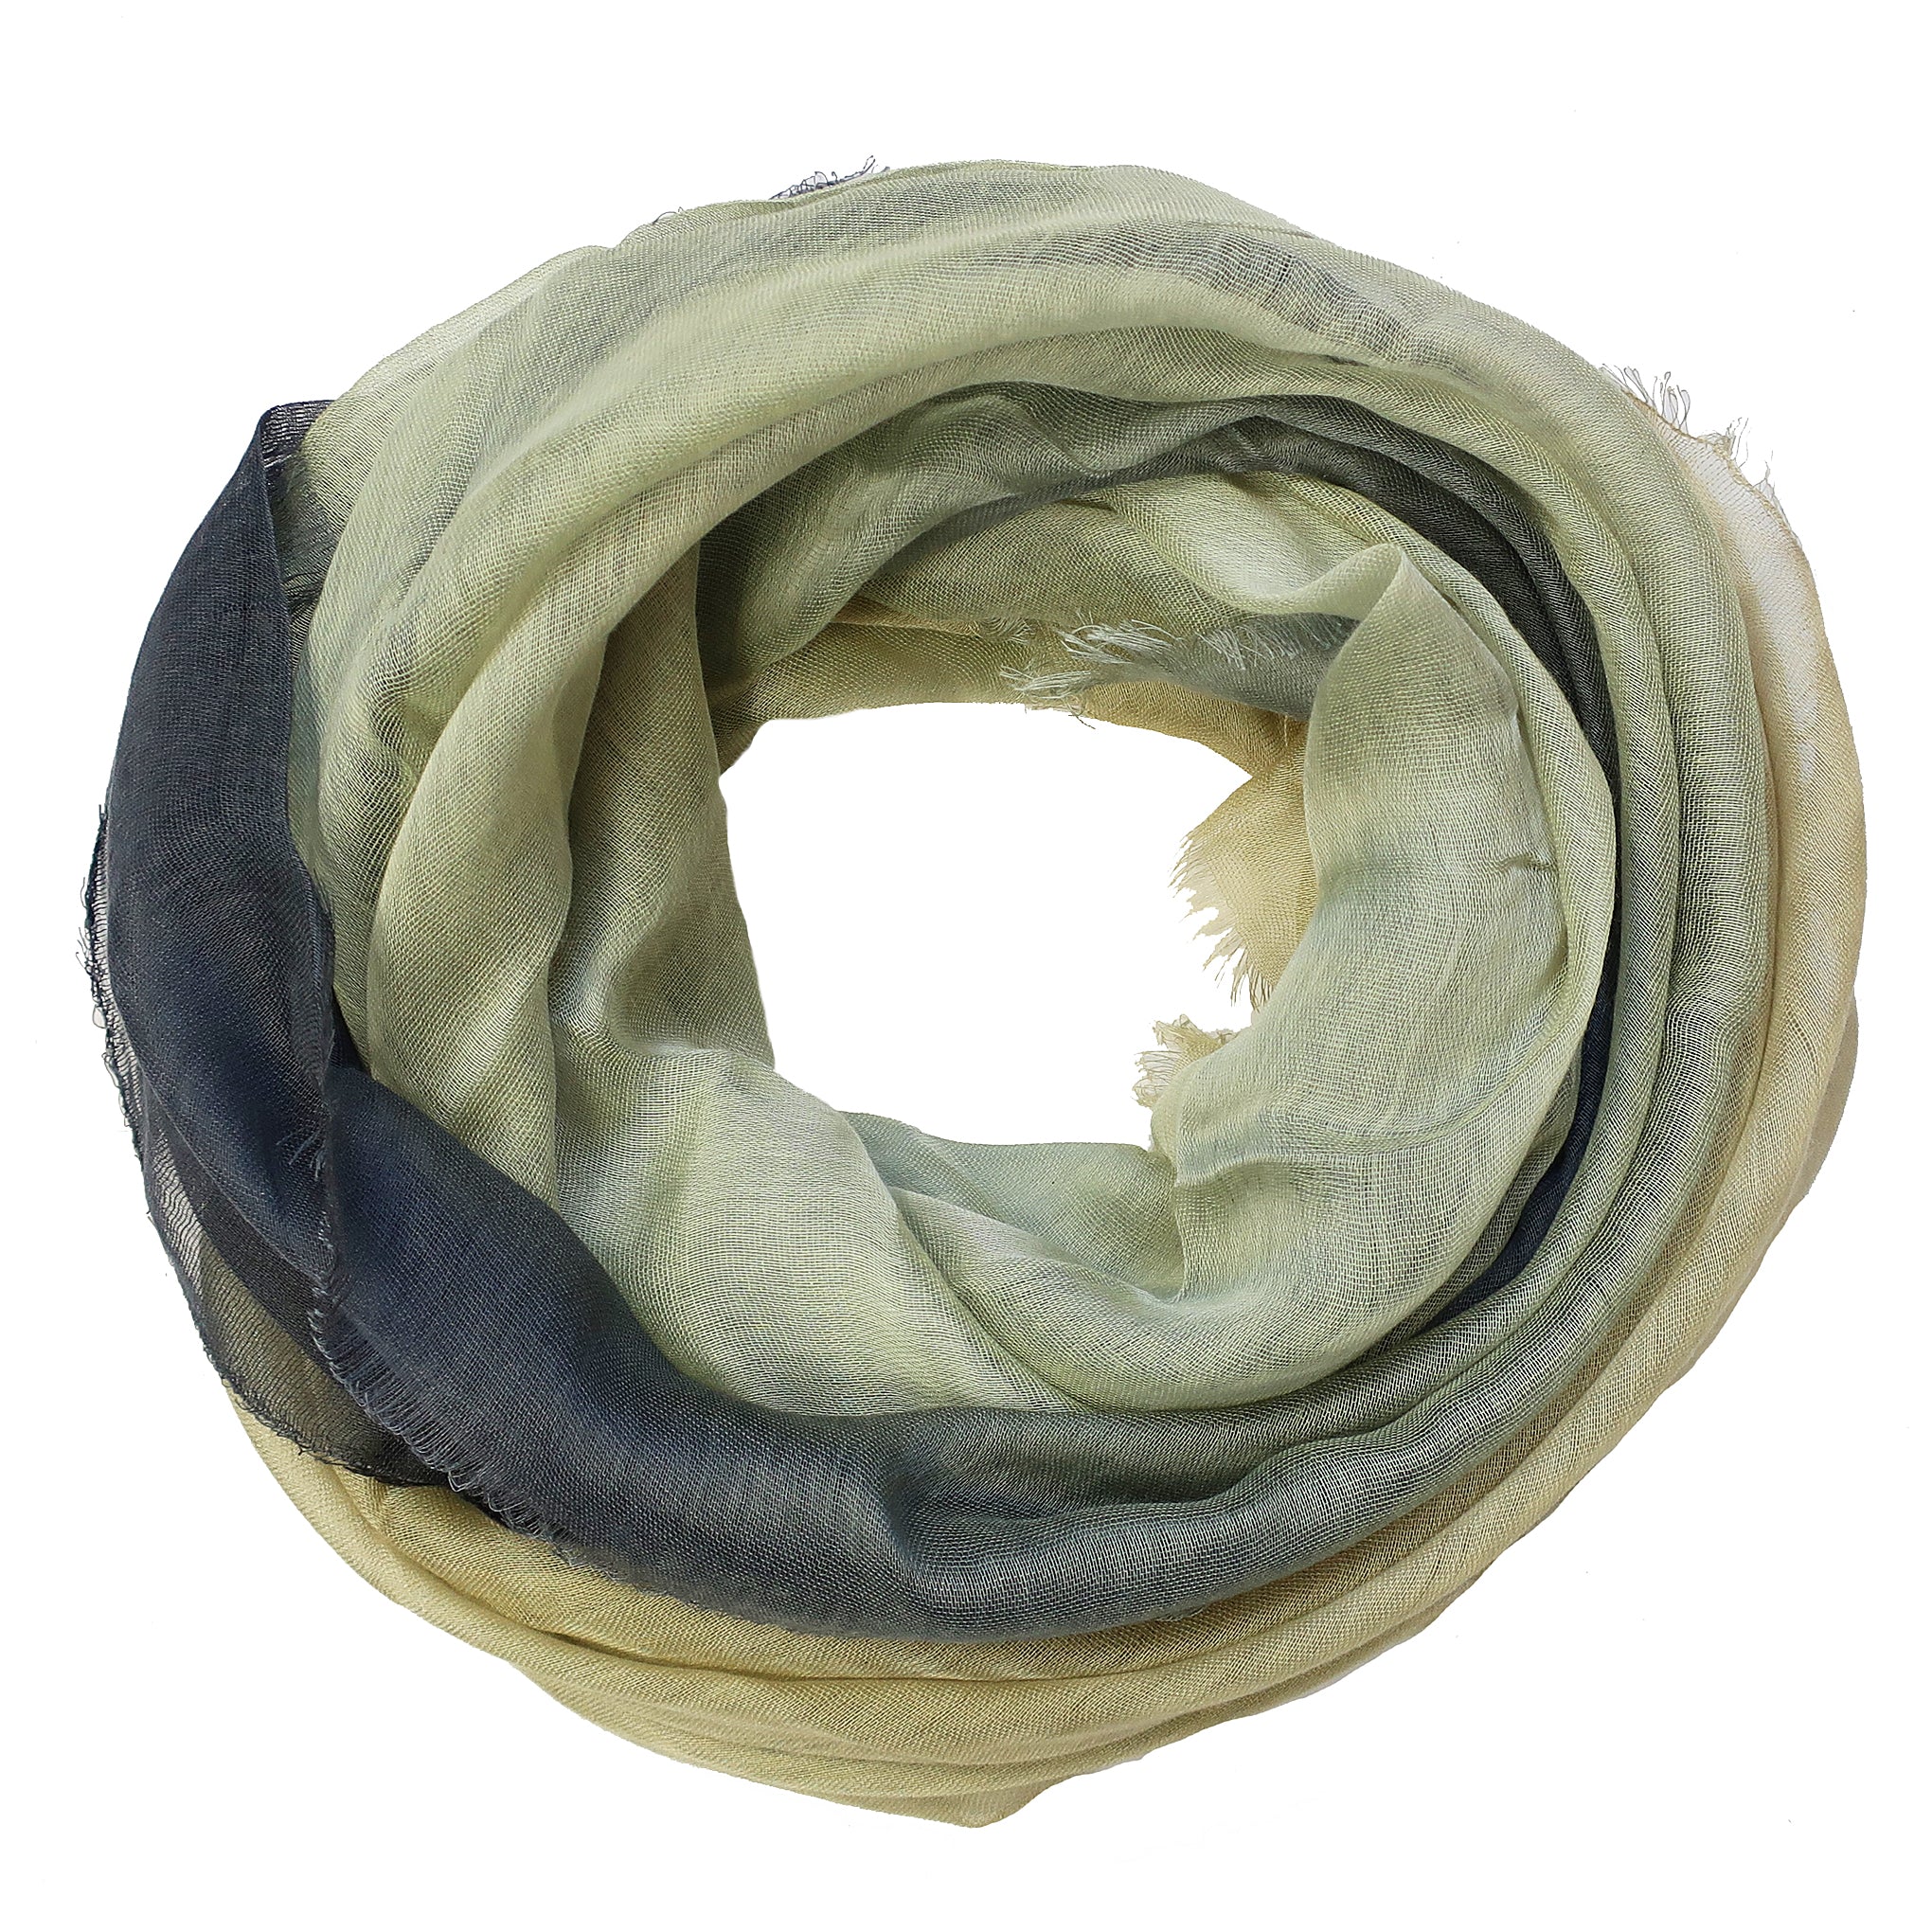 Blue Pacific Dream Cashmere and Silk Scarf in Slate, Green, and Yellow 47 x 37